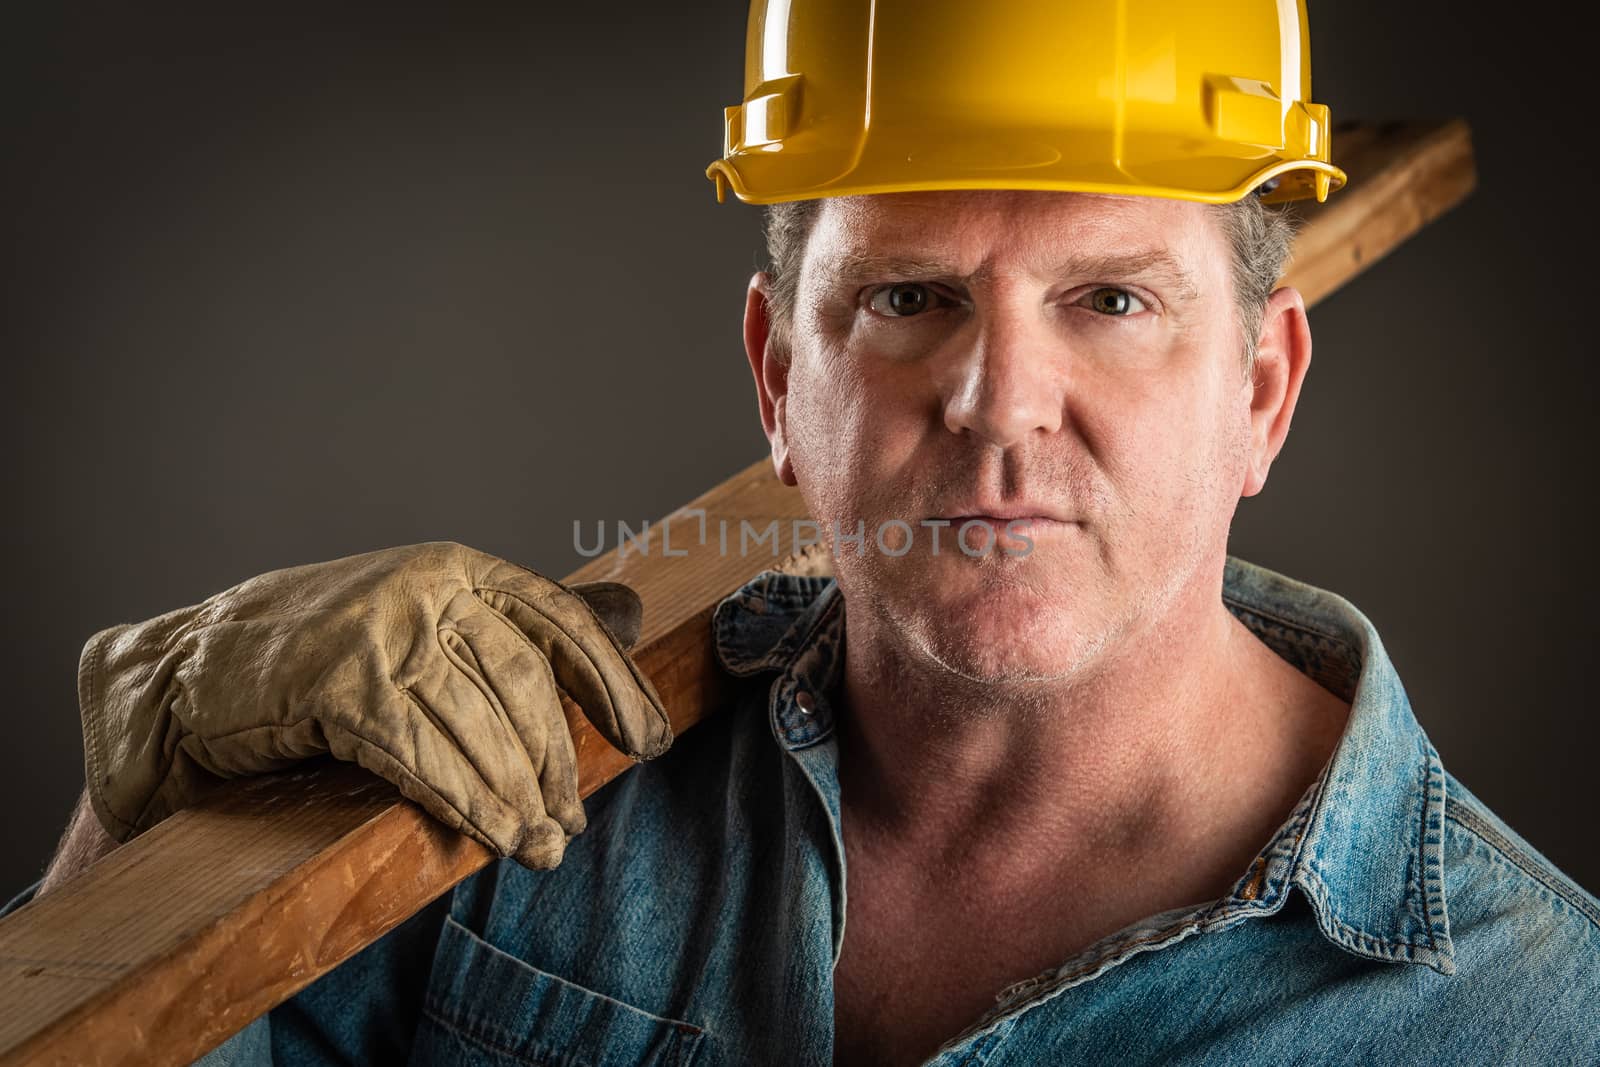 Serious Contractor in Hard Hat Holding Plank of Wood With Dramatic Lighting.